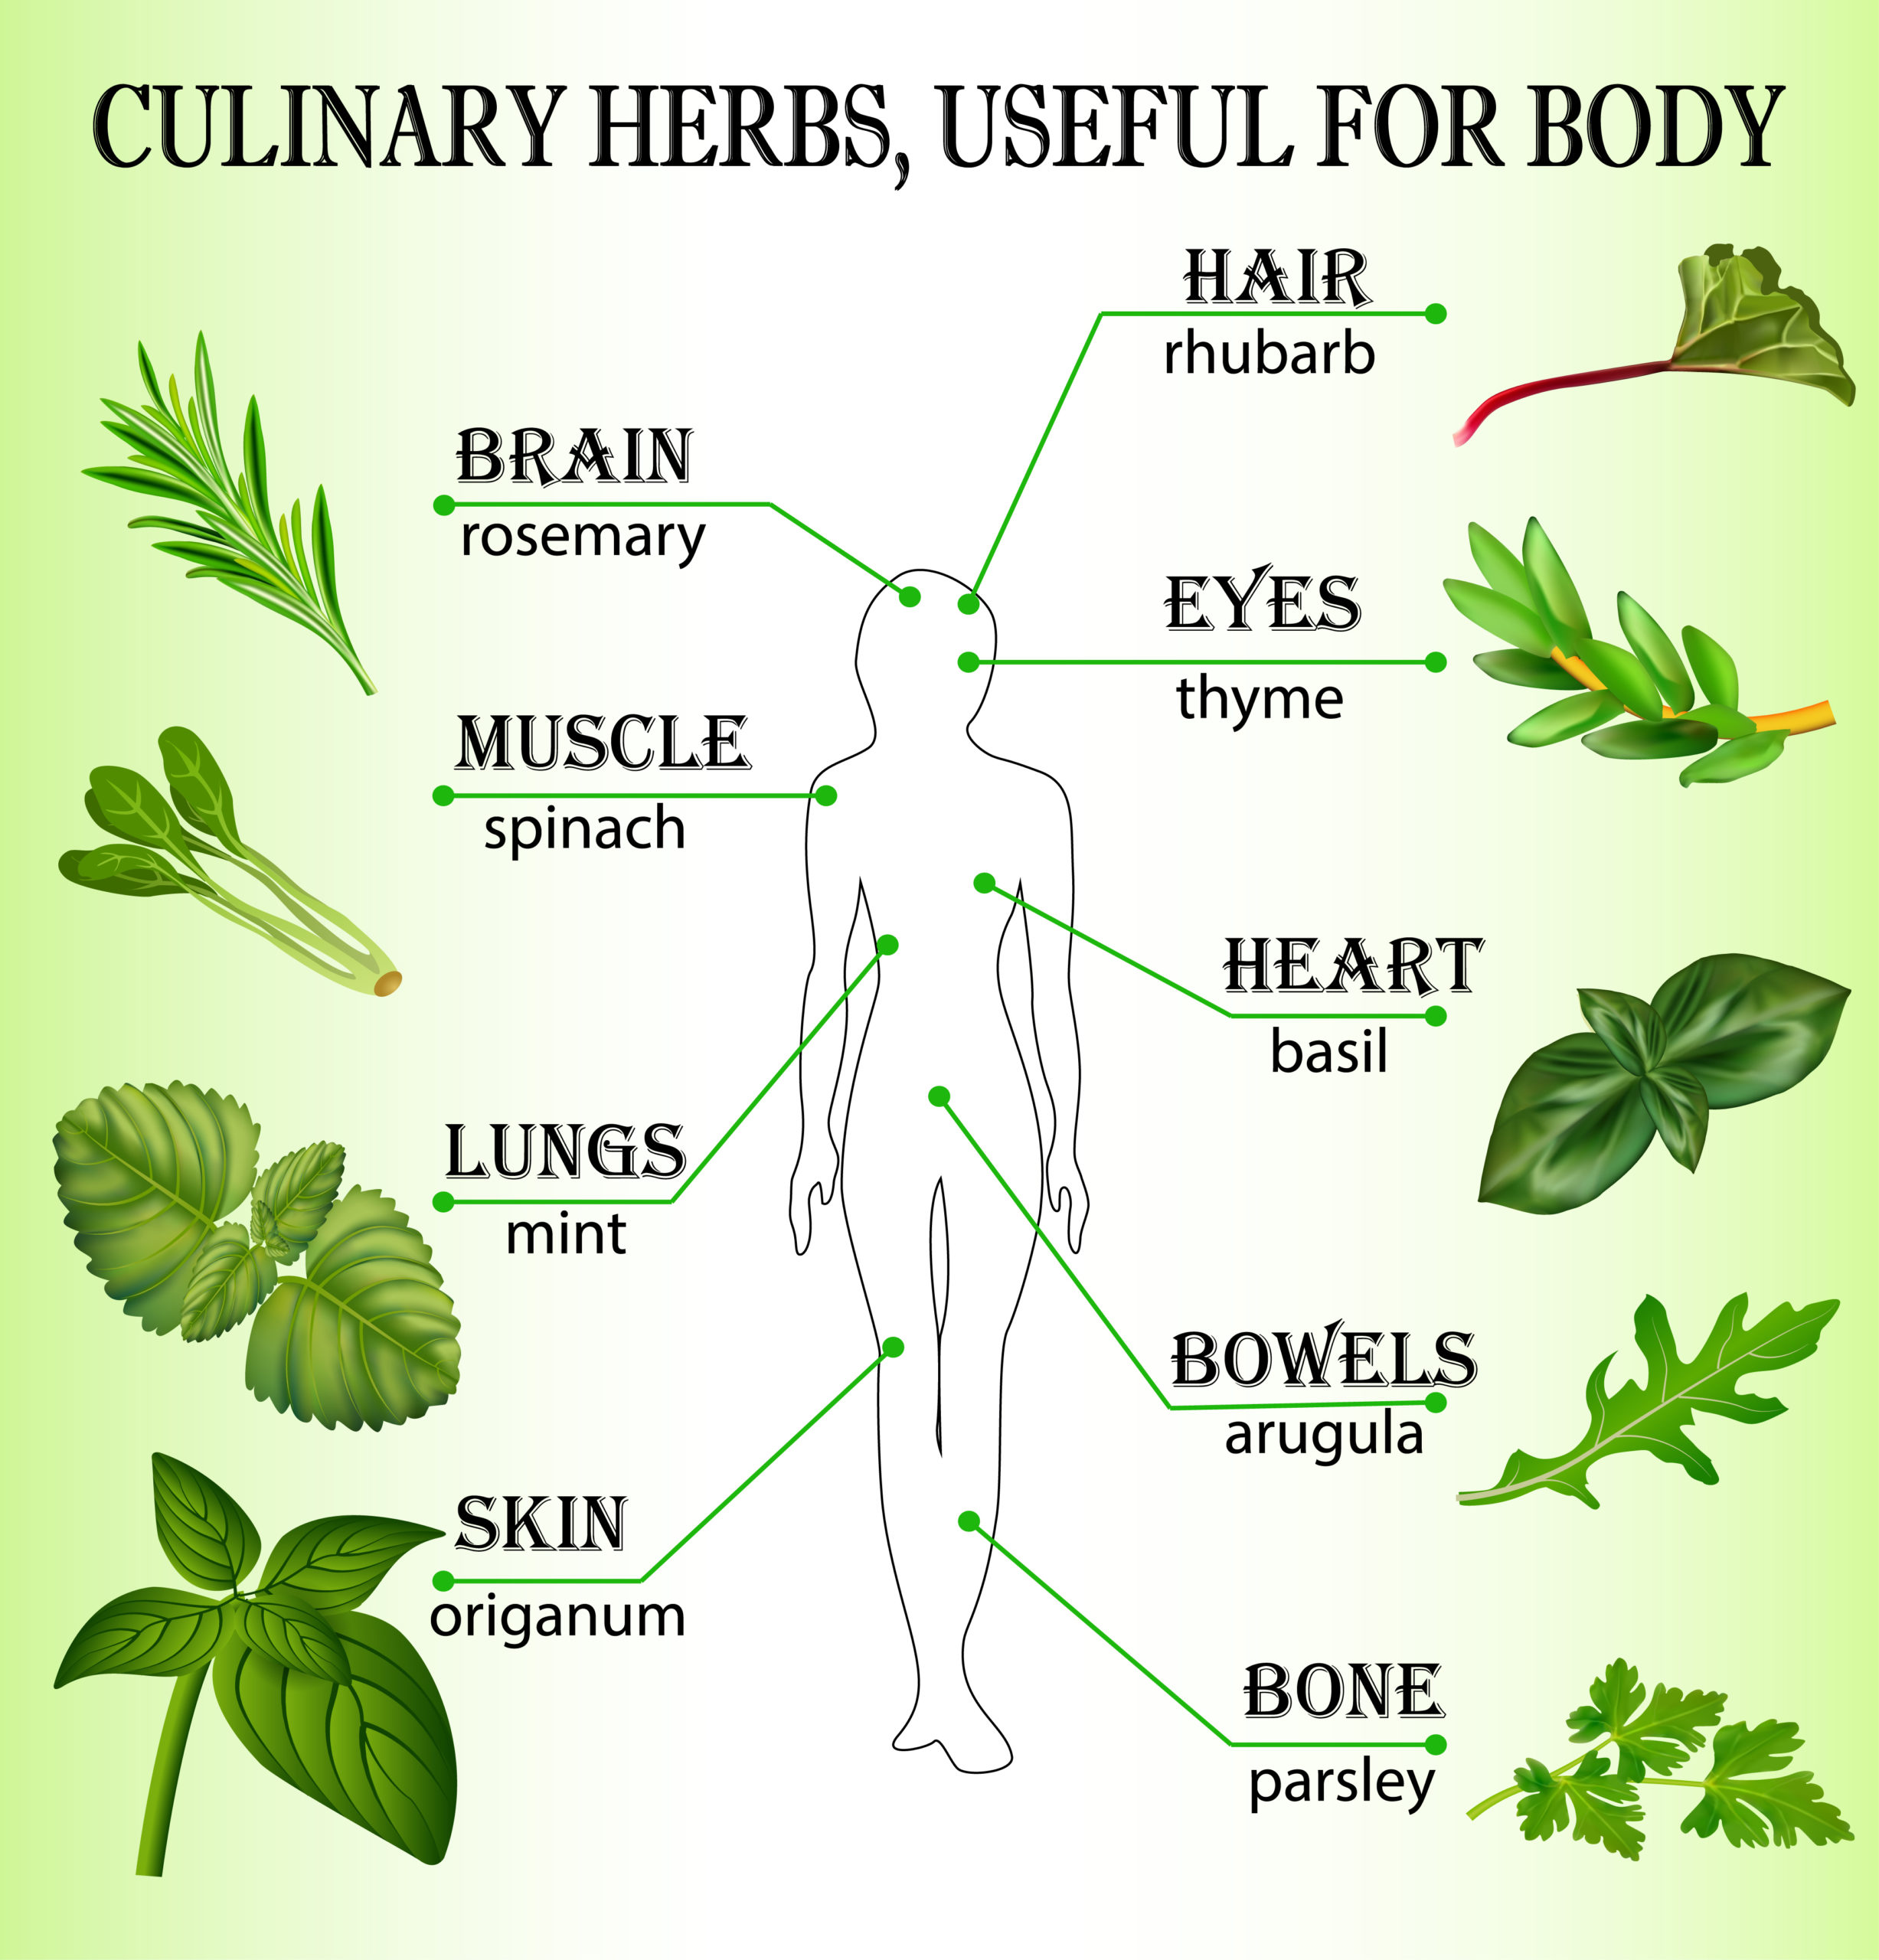 Herbs that promote good health